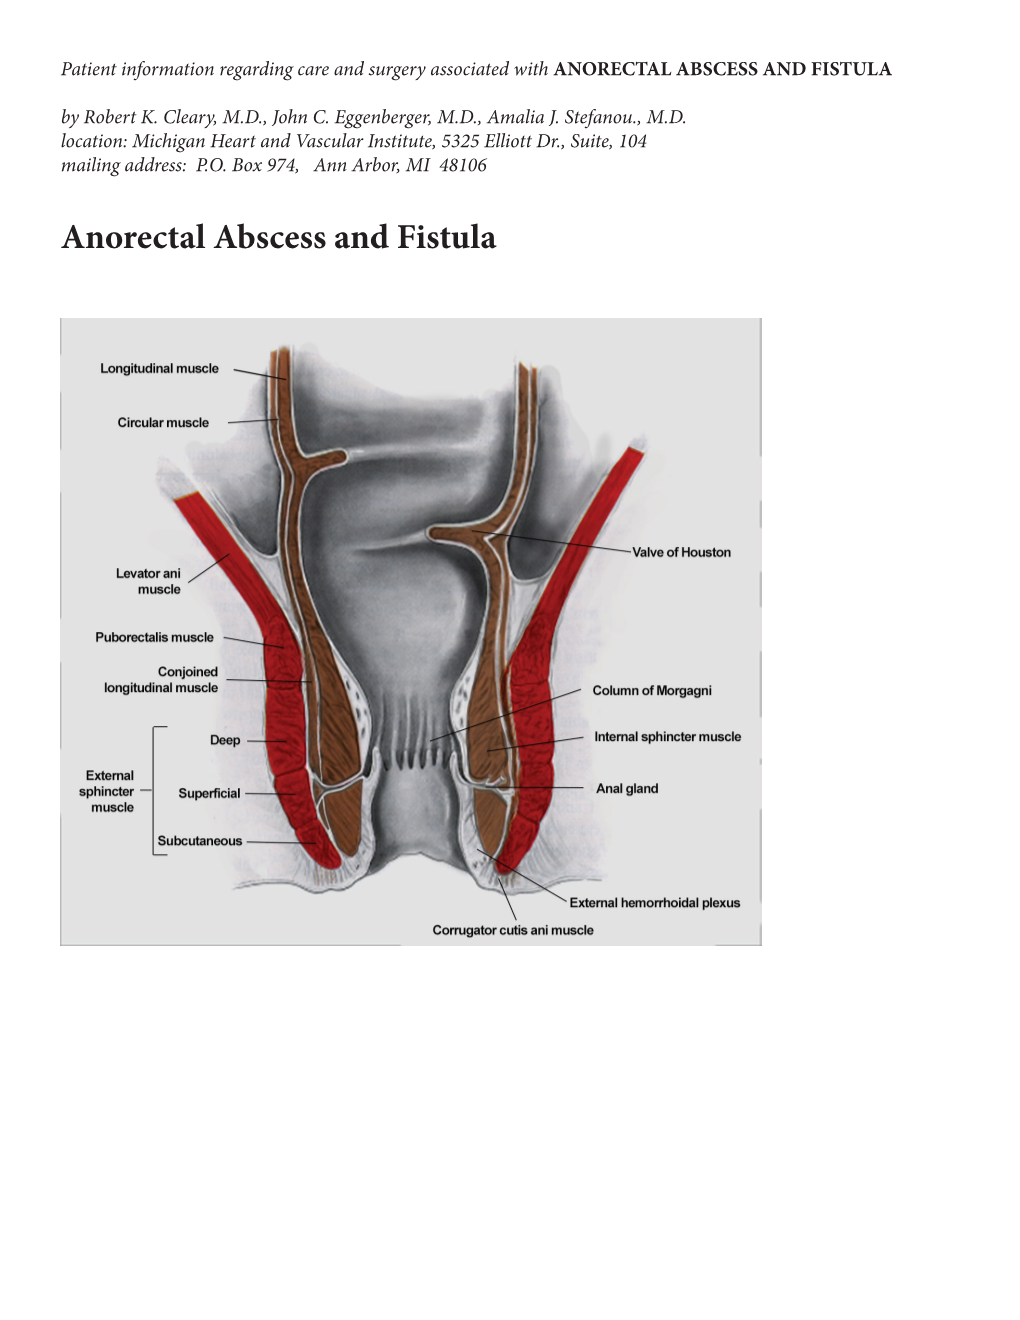 ANORECTAL ABSCESS and FISTULA by Robert K